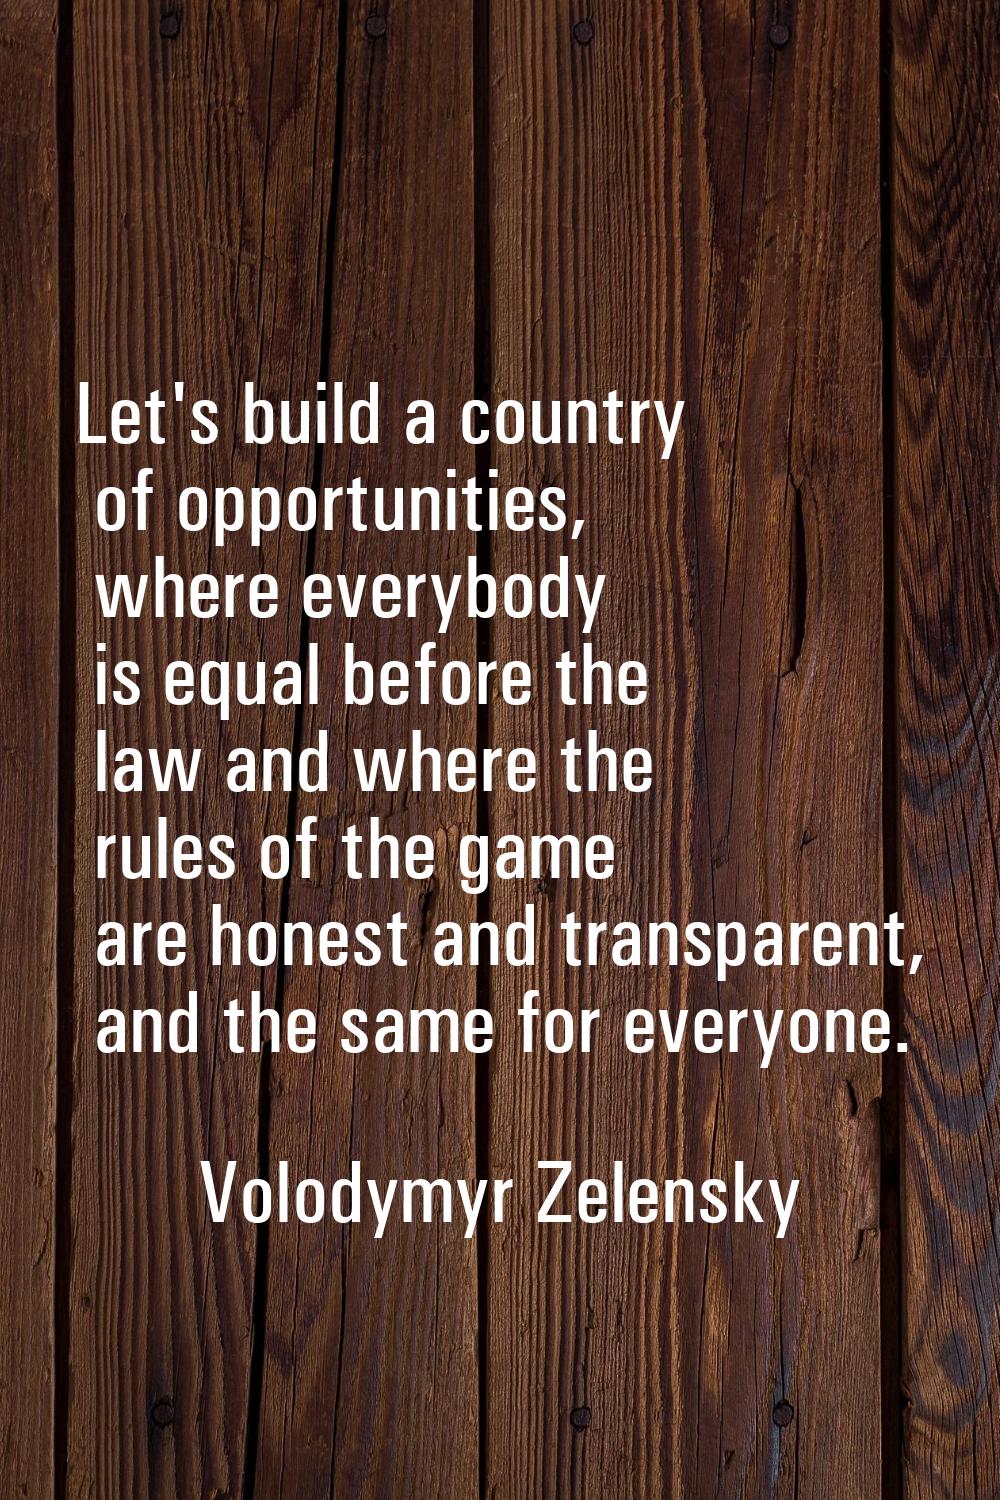 Let's build a country of opportunities, where everybody is equal before the law and where the rules